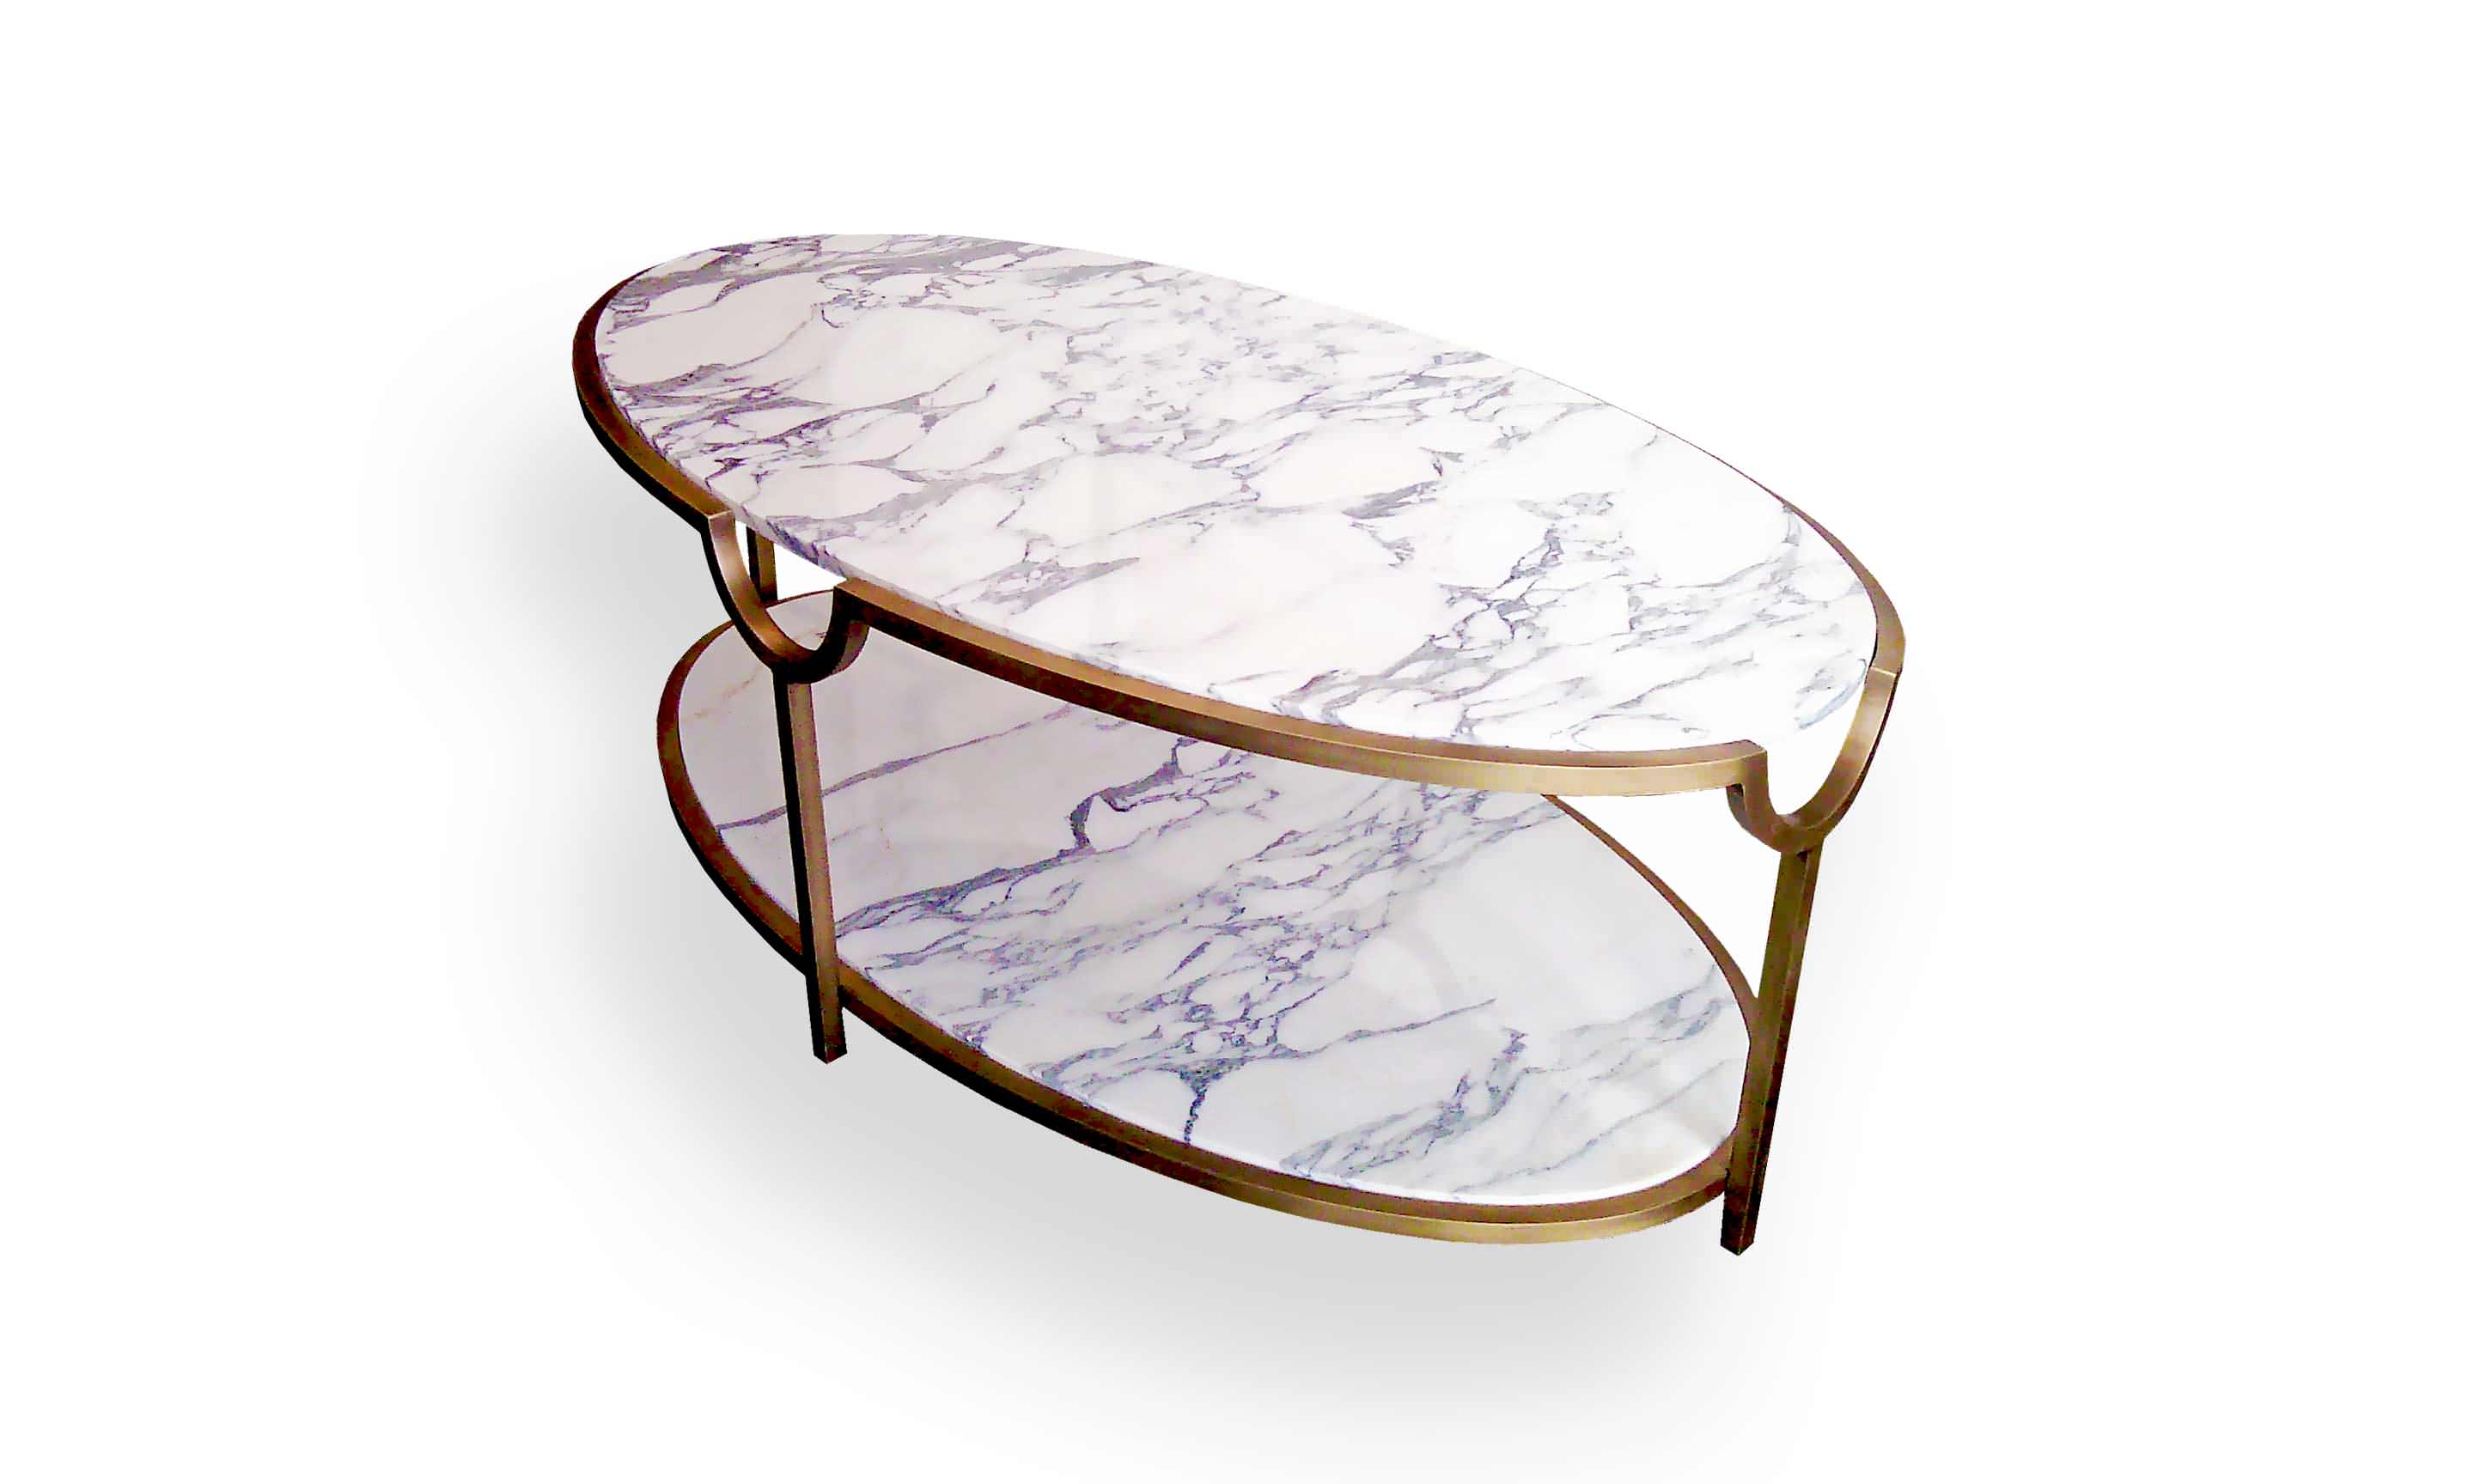 Arabescato marble coffee table